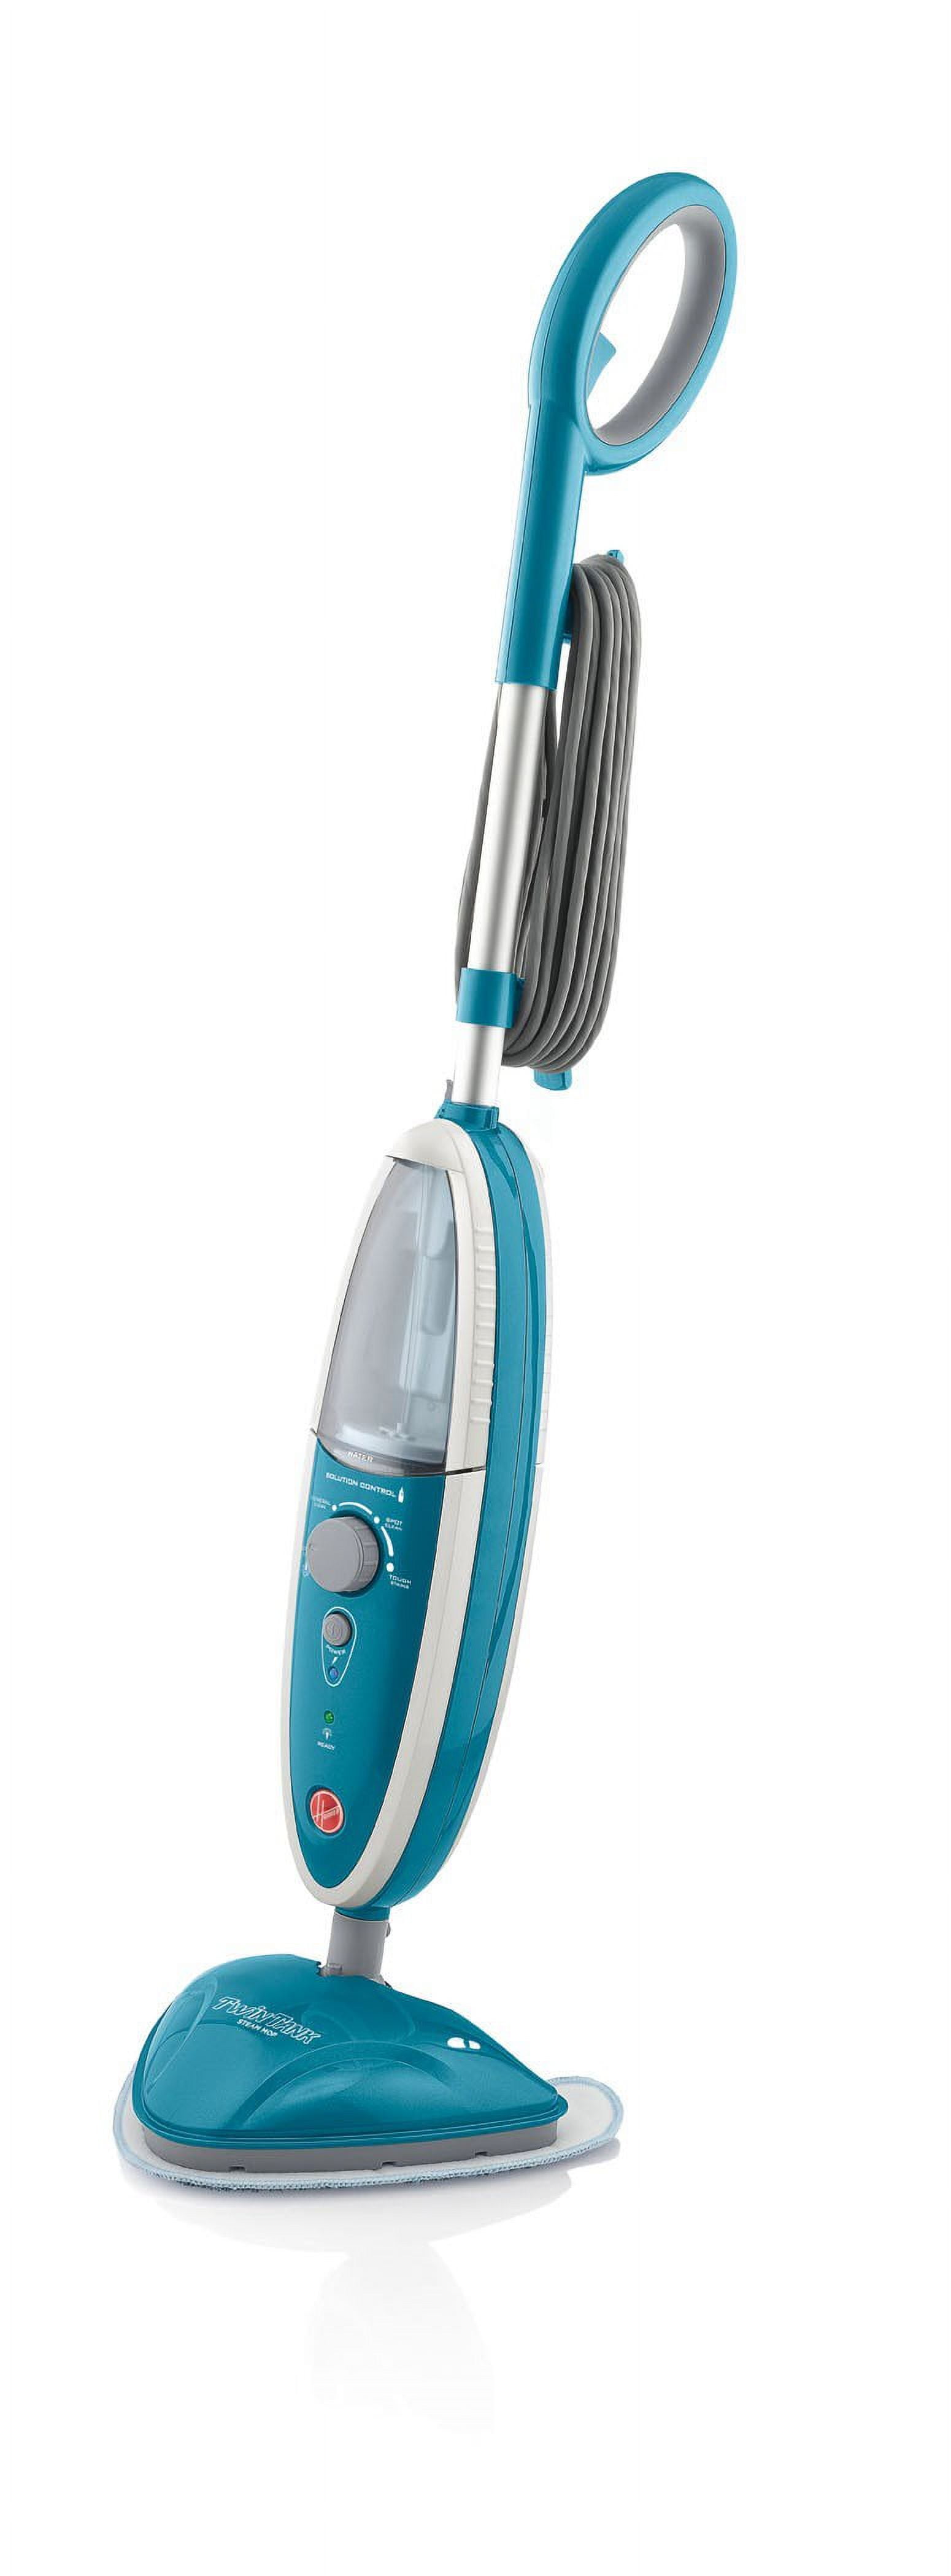 Hoover Steam Mop TwinTank Stick Steam Cleaner, WH20200